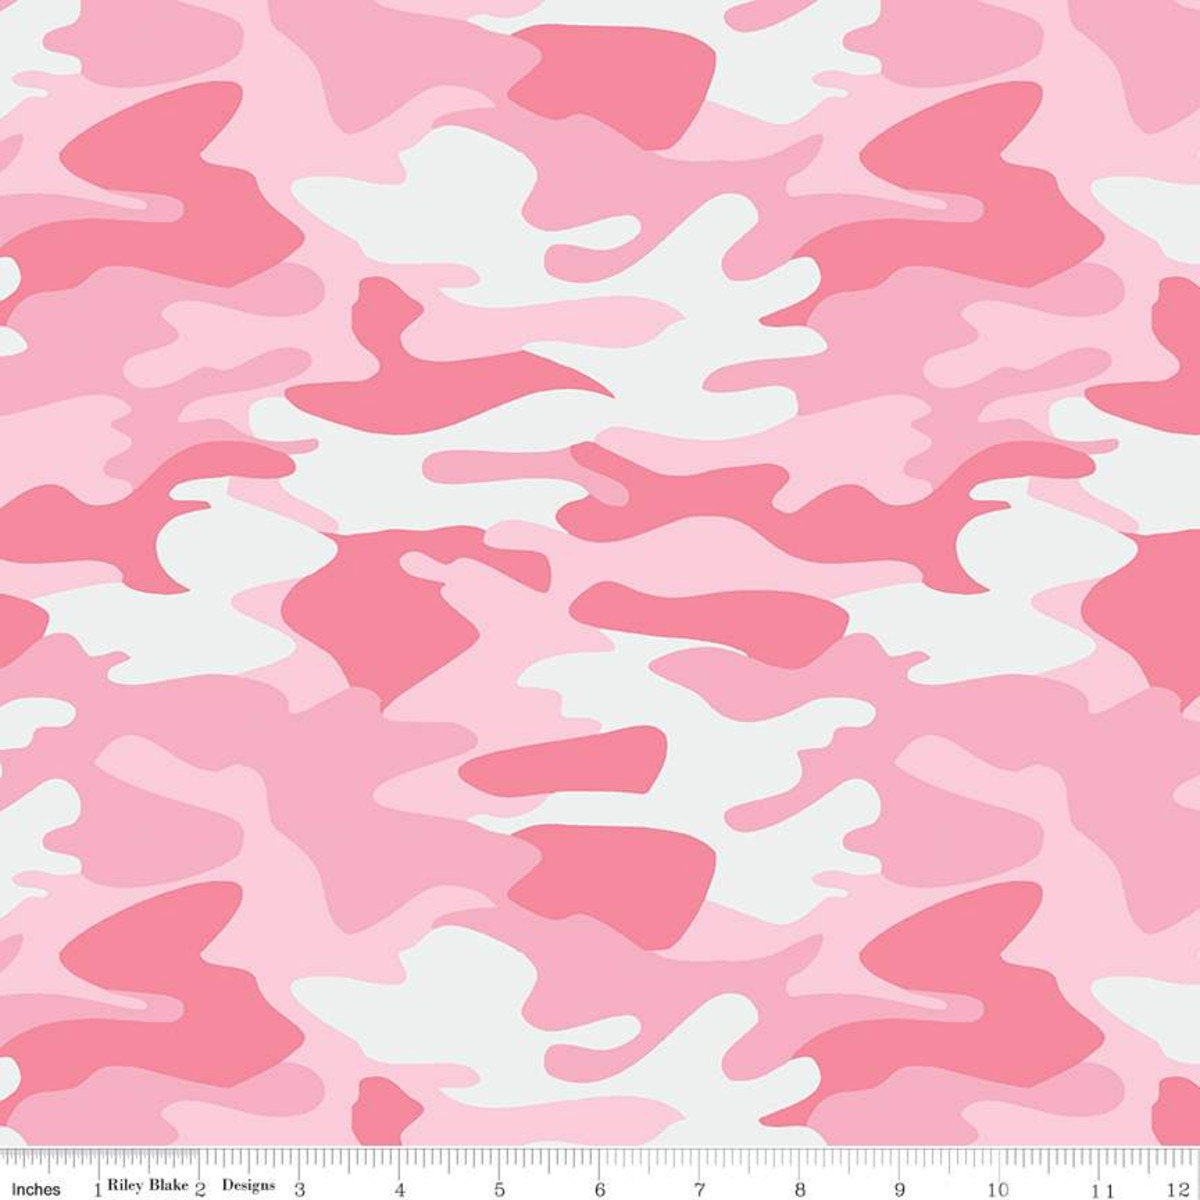 Pink Camo Cotton Fabric, Riley Blake Nobody Fights Alone Camo Hot Pink,  Cotton Quilting, Camouflage, by the Yard Mask Making Fabric Quality -   Singapore